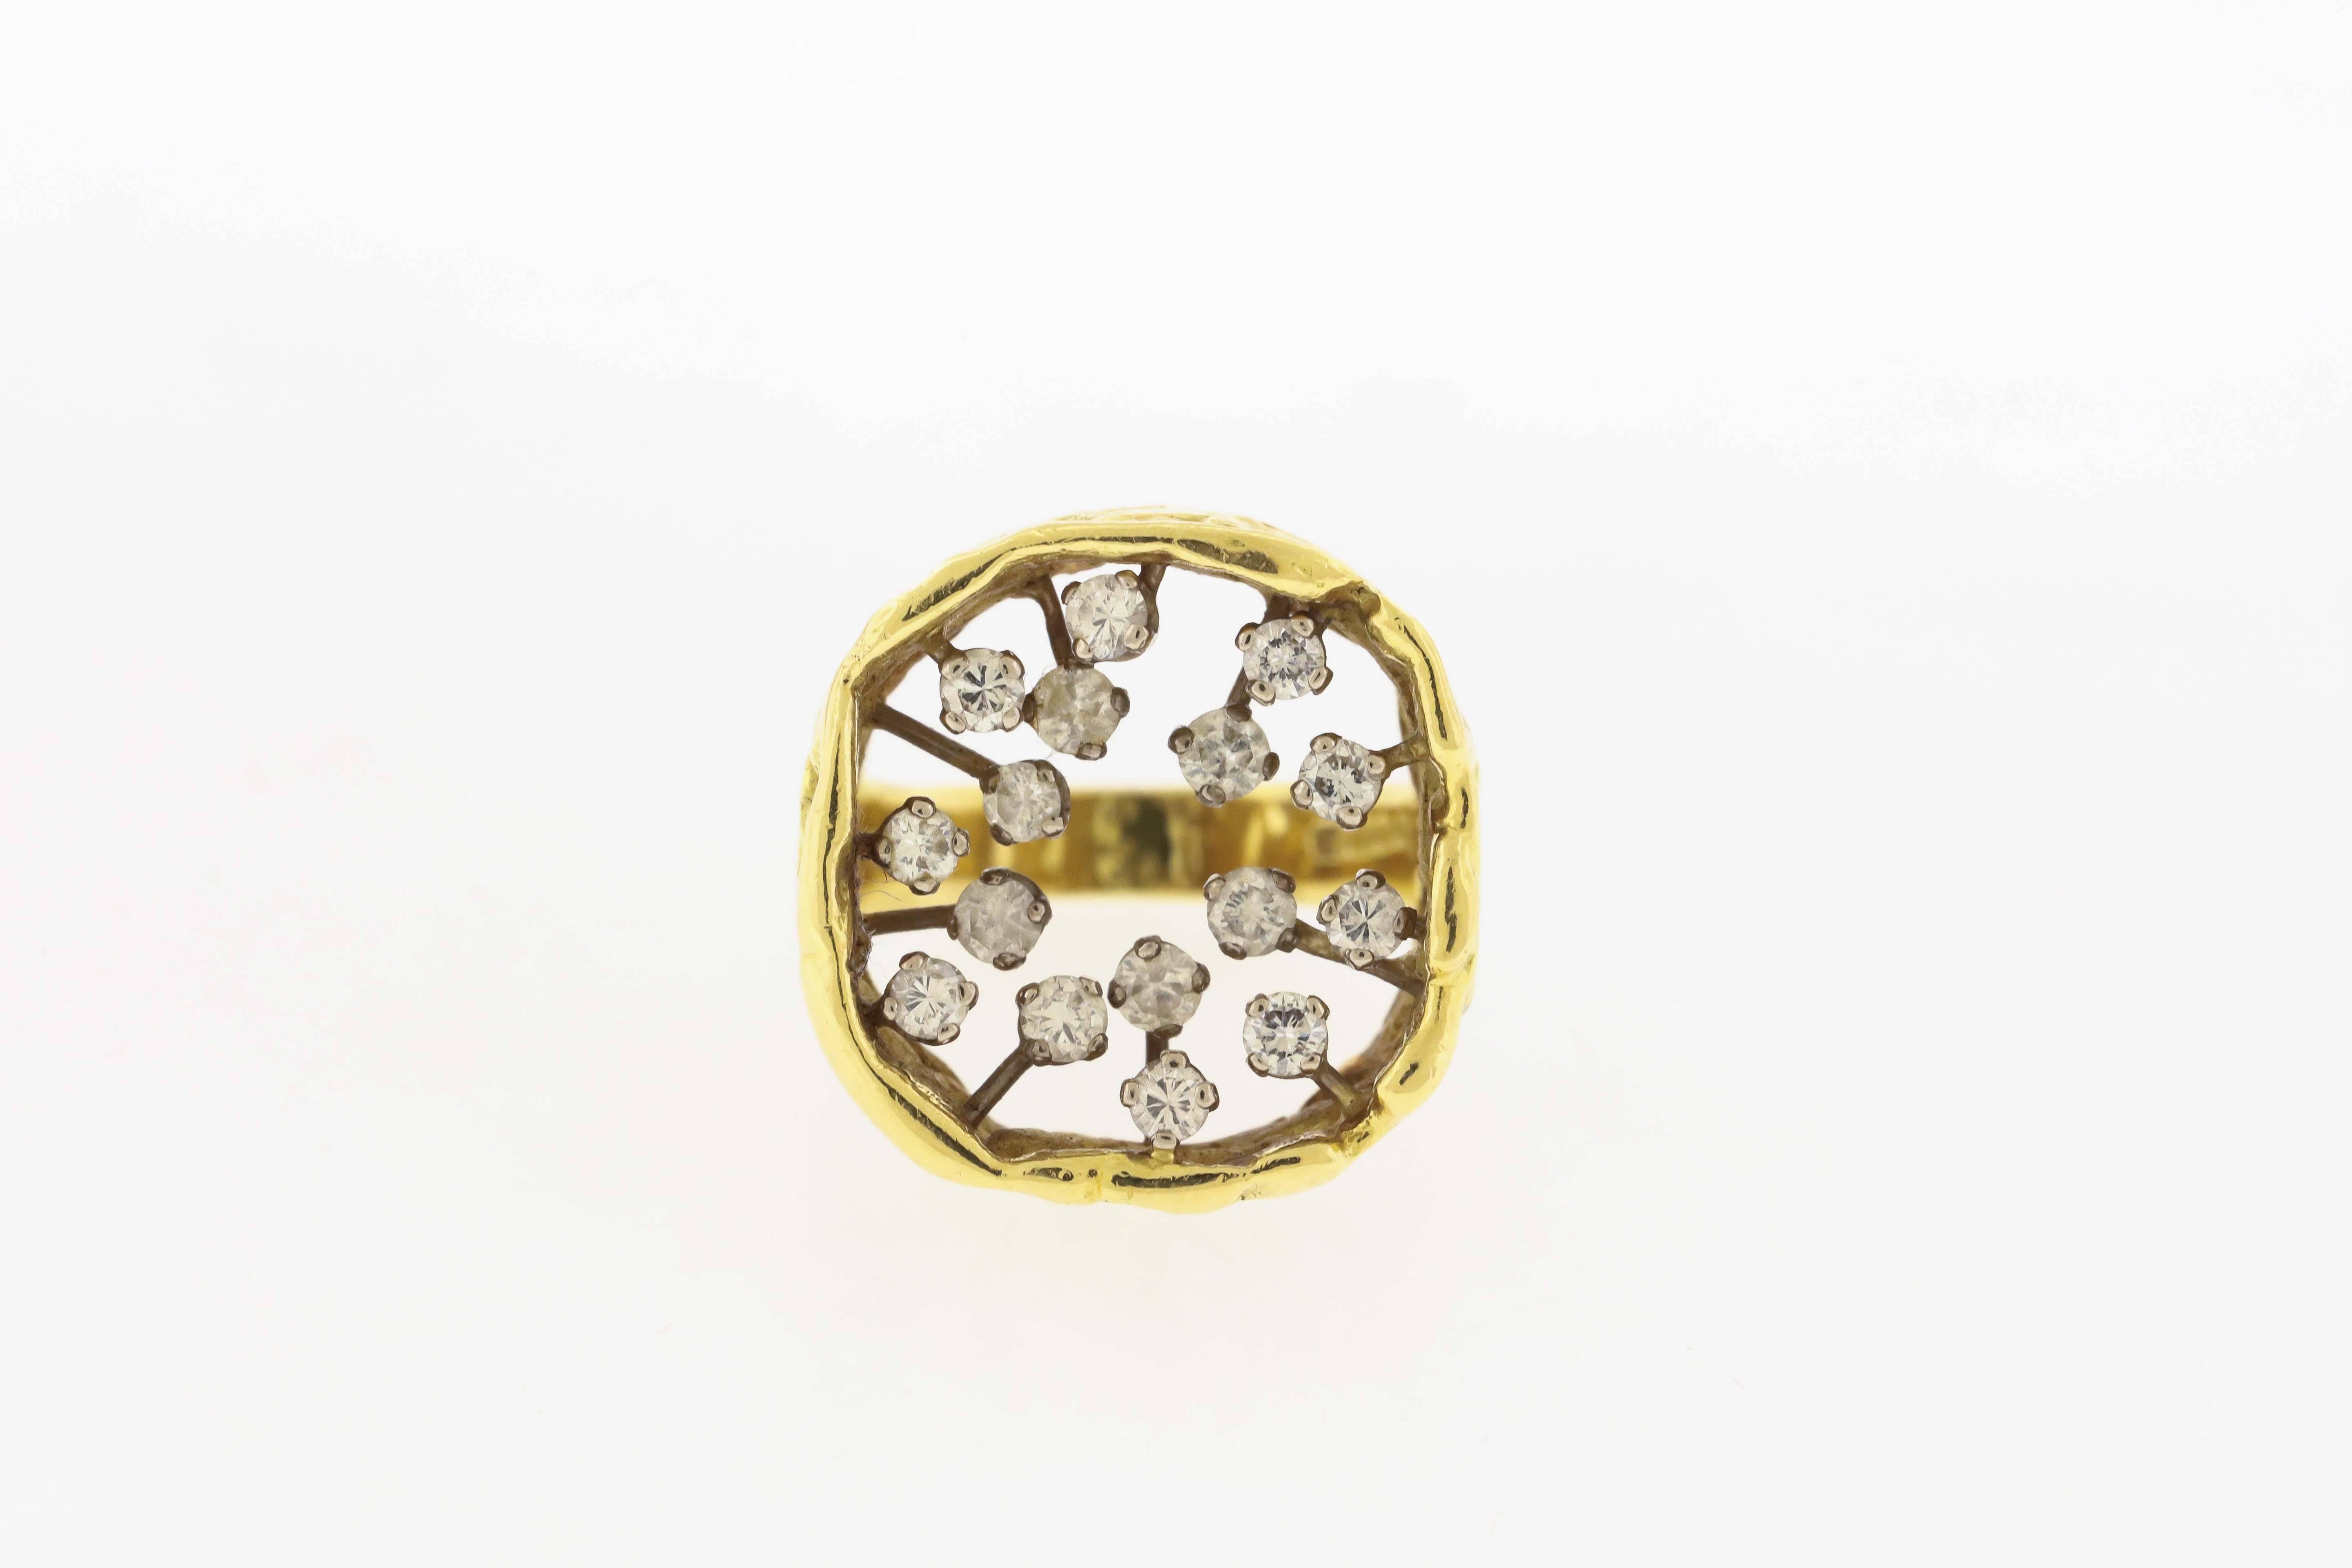 18K yellow gold ring by famed mid-century British goldsmith and studio jewelry John Donald, features approx.. 1.00 carat diamonds in an open cushion-shape square suspended above the finger, the ring in Donald's textured gold nugget style, made 1972.